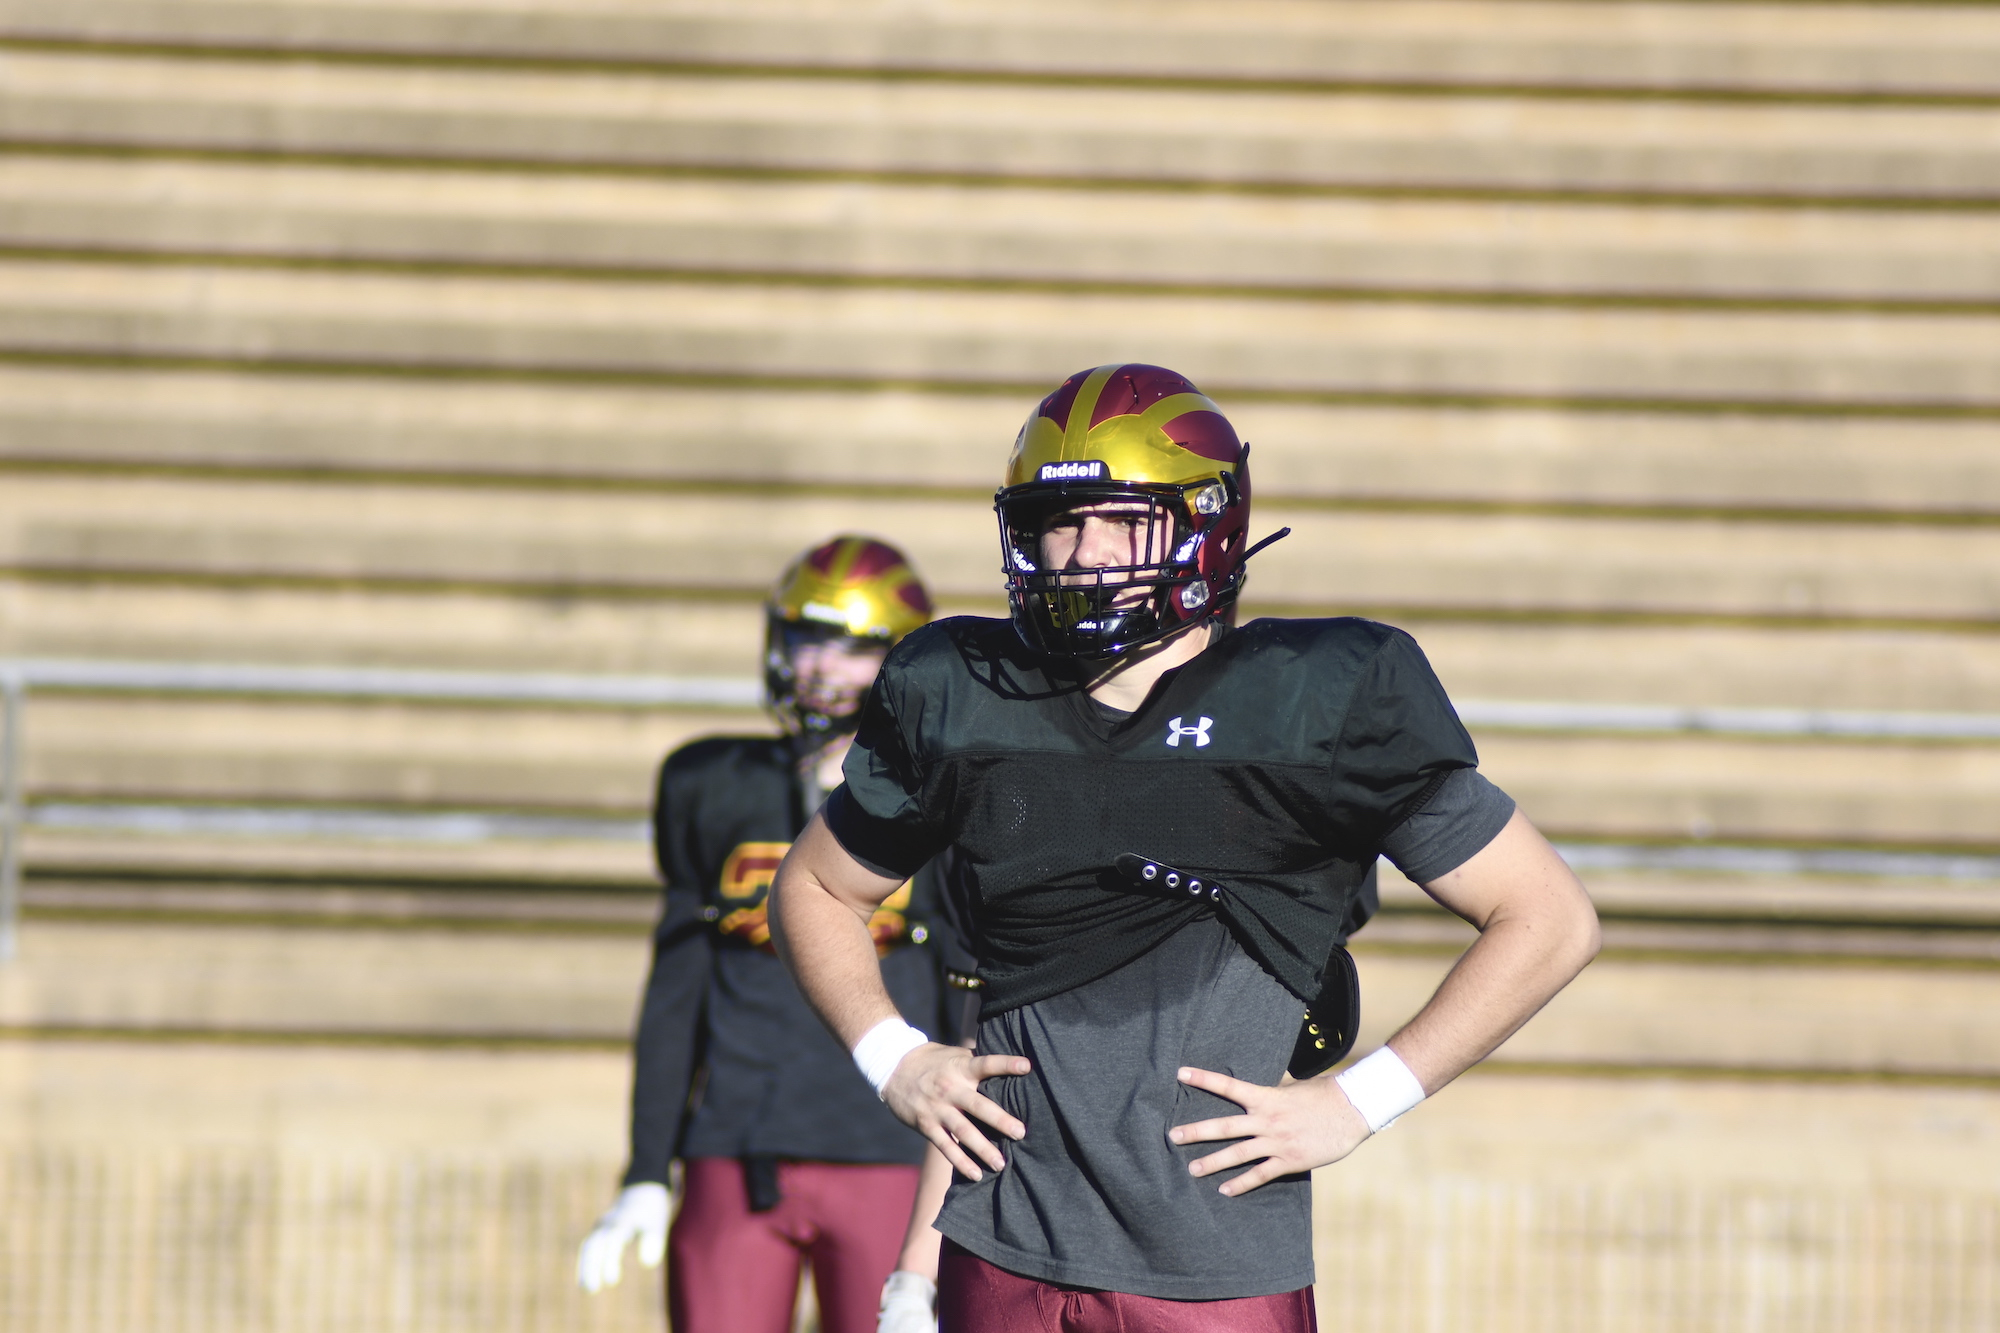 Photos: Torrey Pines Holds Padded Football Practice In Preparation Of intended for Torrey Pines High School